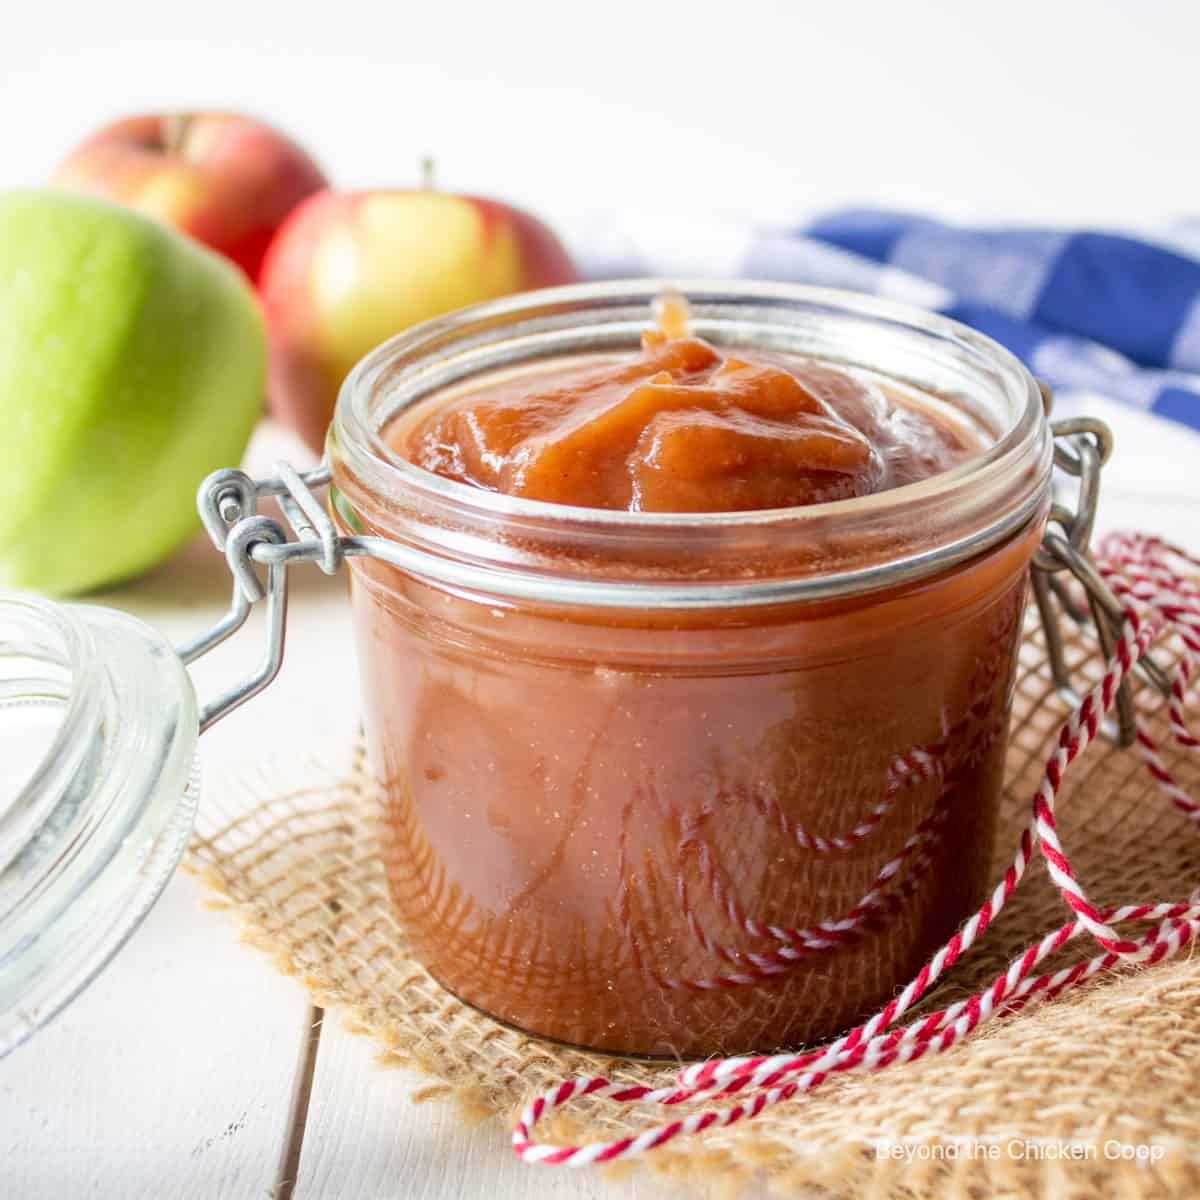 A glass crock filled with brown apple butter.